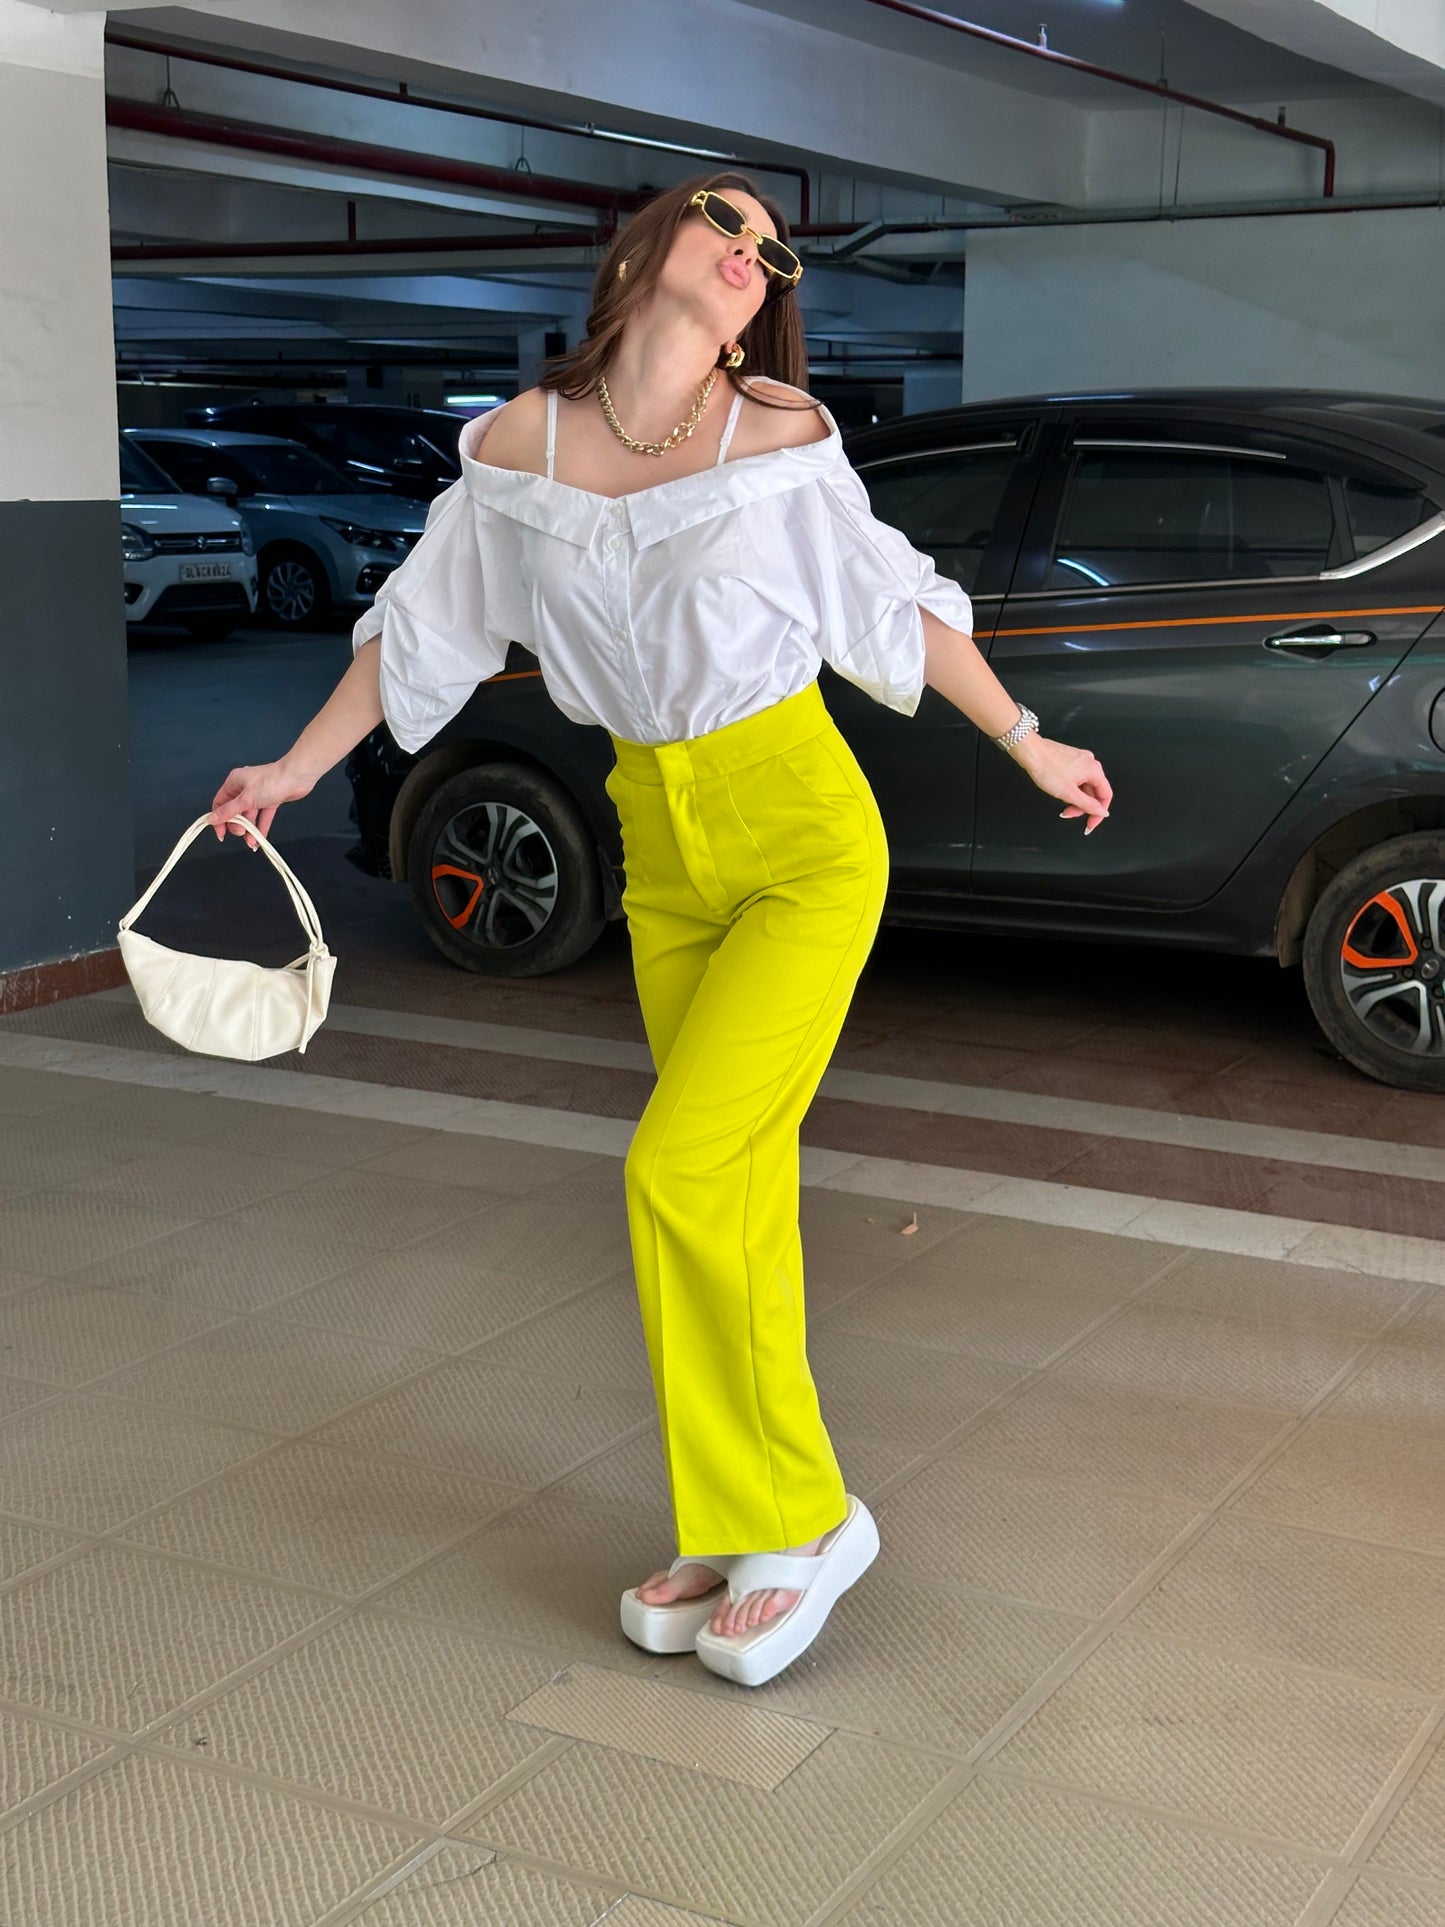 White Off-shoulder Shirt With Neon Yellow Pants